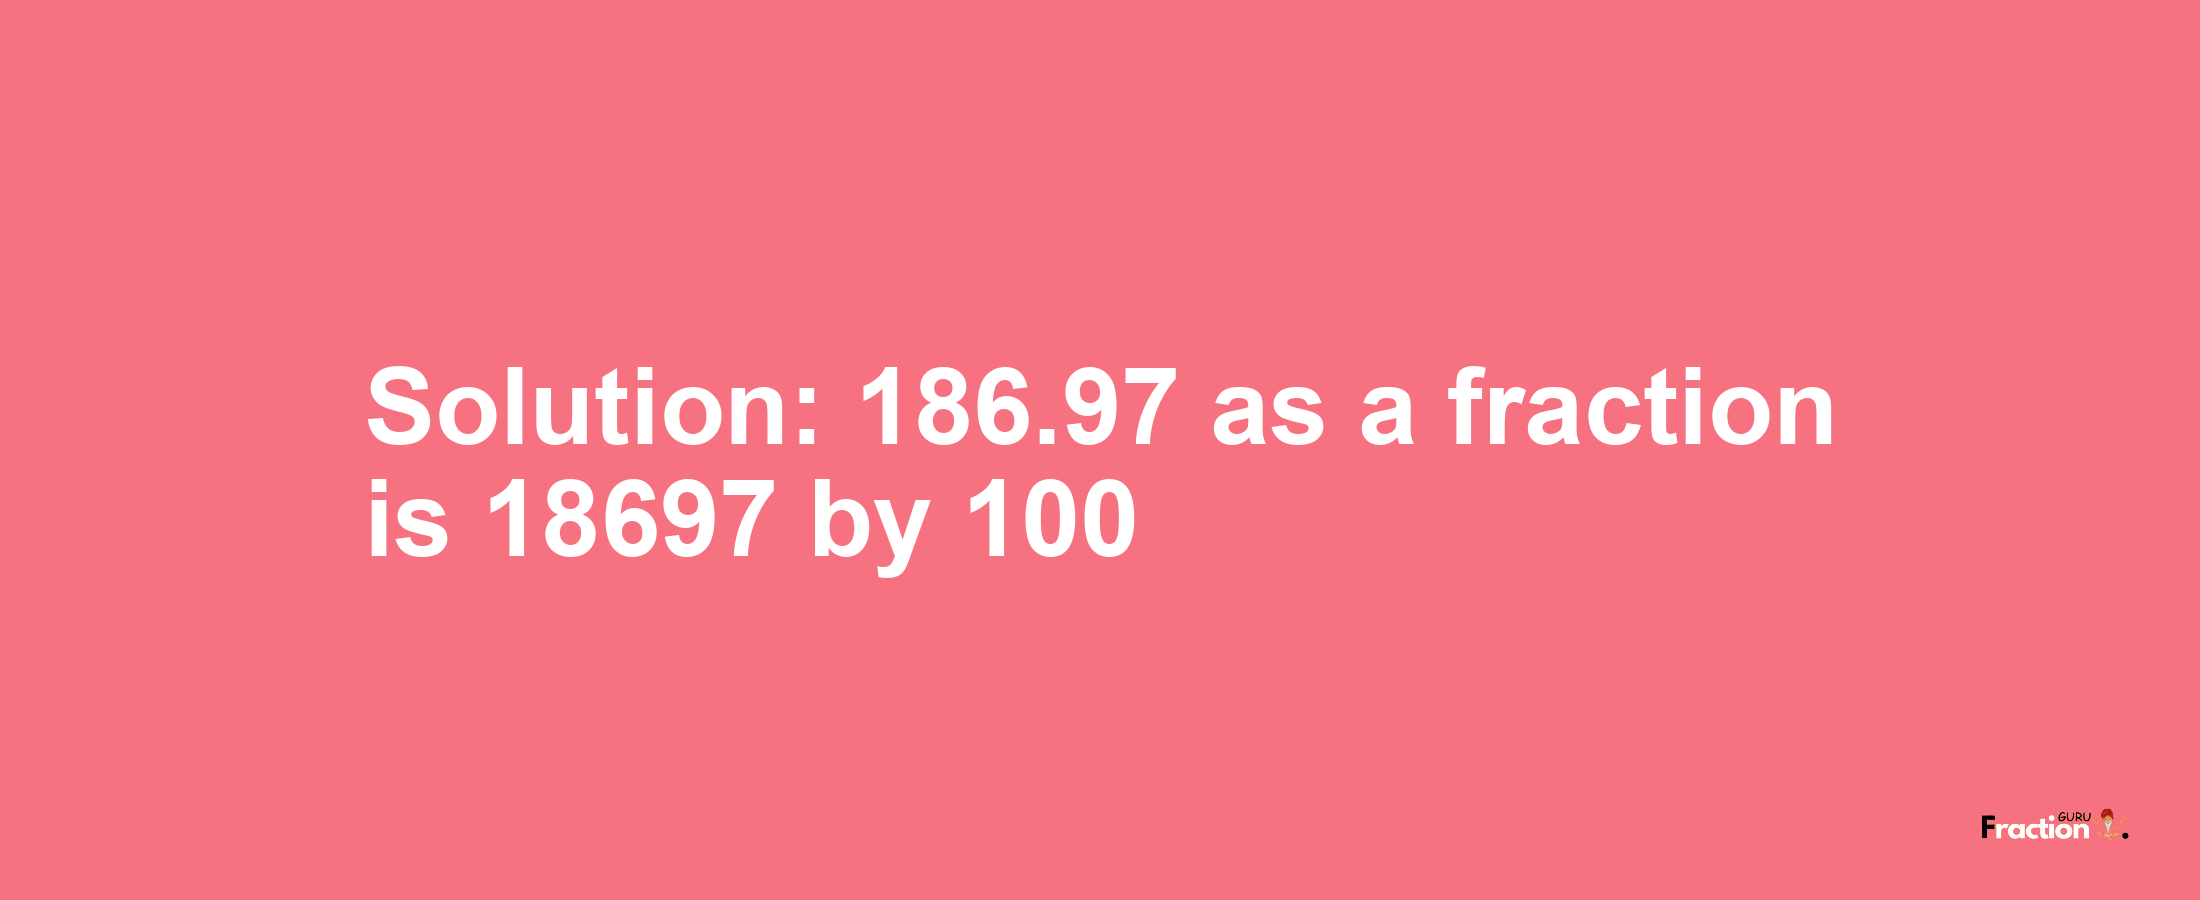 Solution:186.97 as a fraction is 18697/100